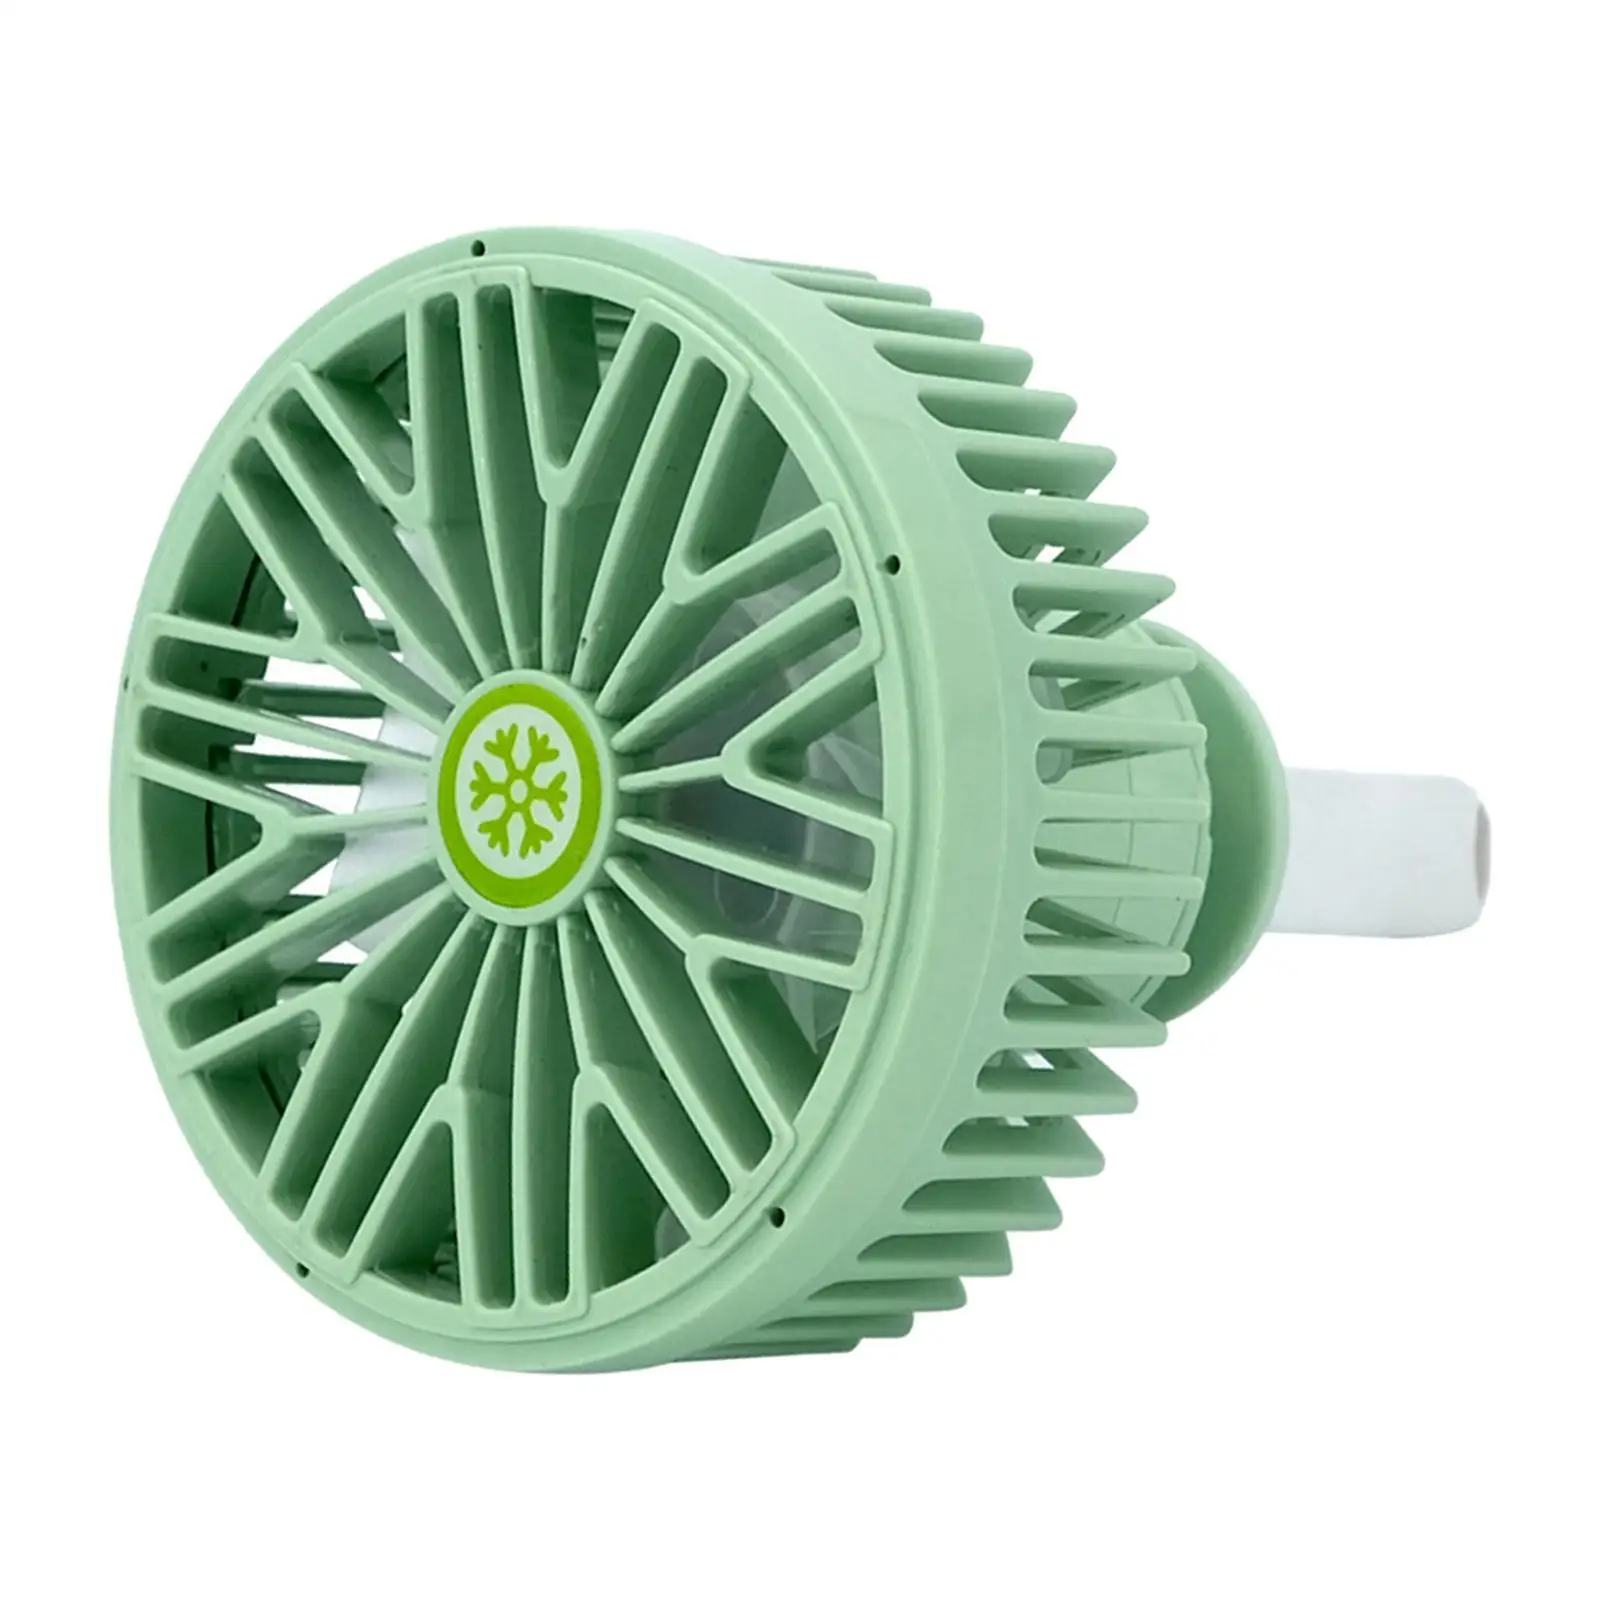 Vehicle Car Cooling Fan Vent Clip Fan 360 Rotation, with Night Light Air Conditioner